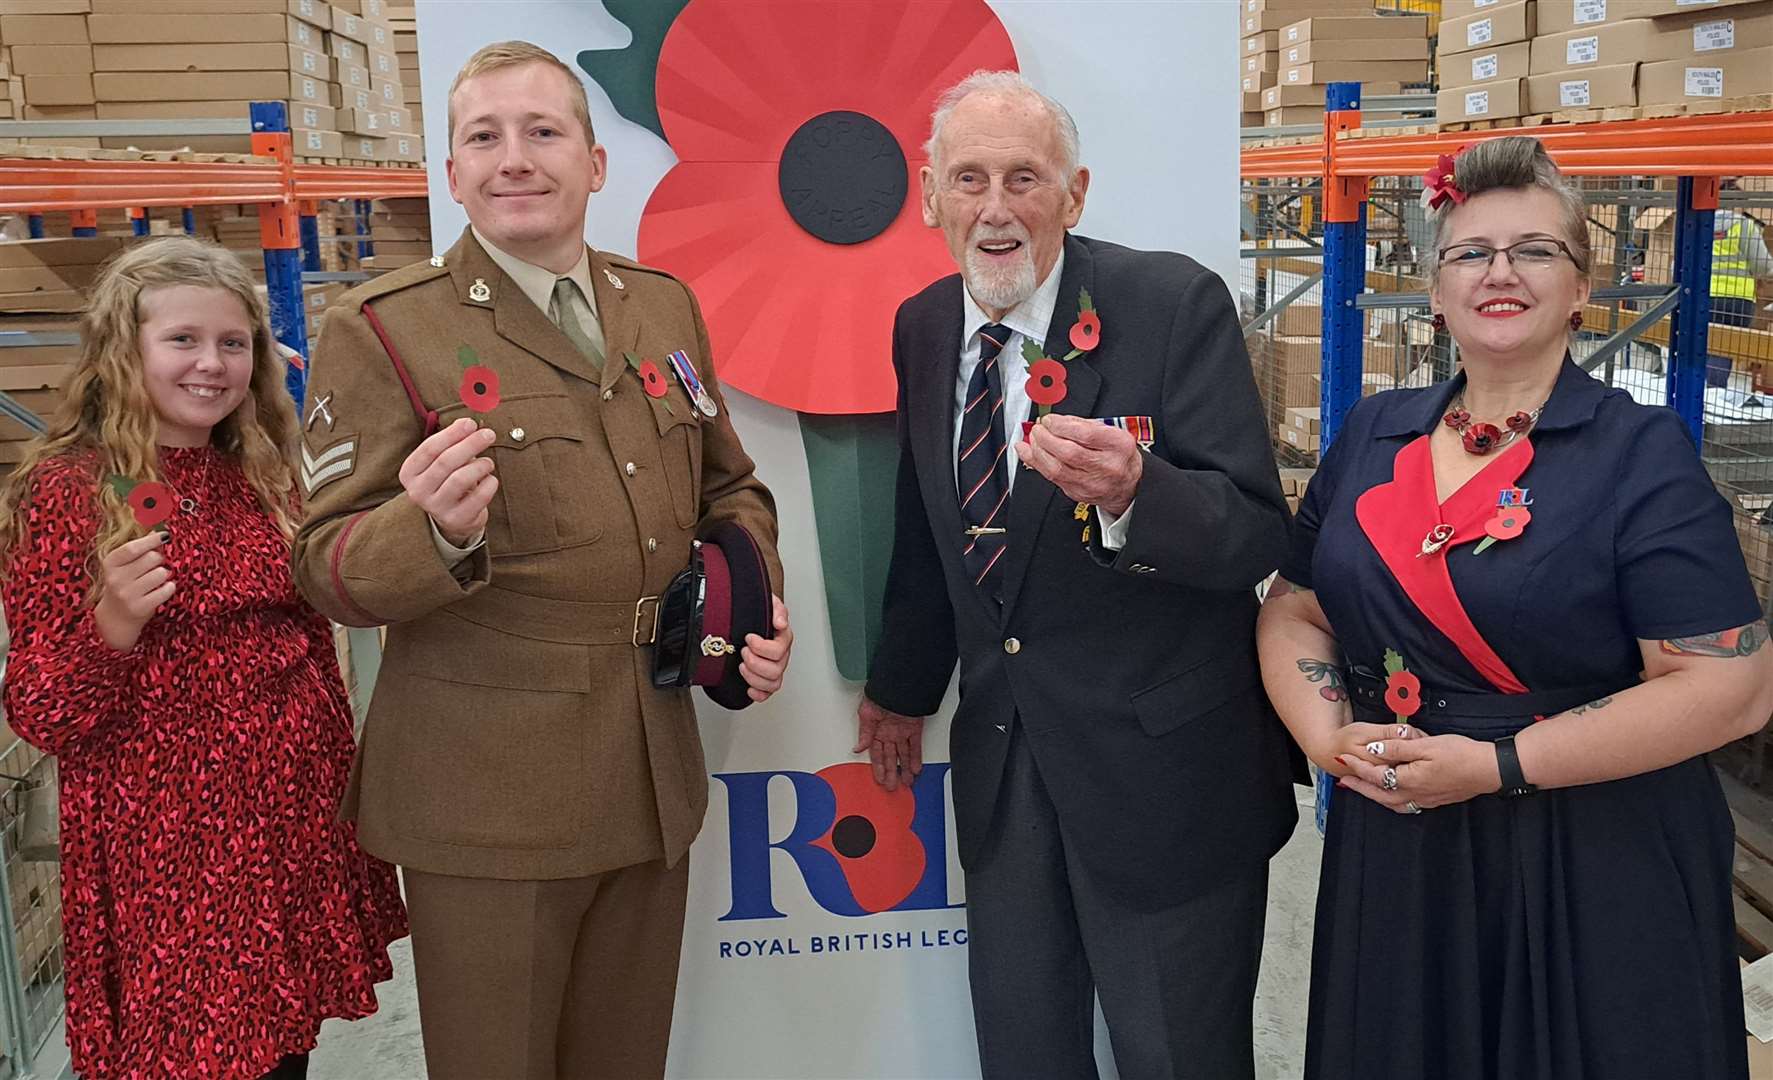 Poppy ambassadors: Maisie Mead, who has helped with the appeal since she was four; Ashley Martin, a serving Lance Corporal in the Royal Army Medical Corps, who has himself received support from the RBL; Rear Admiral John Roberts, aged 99, and Jill Merrett from Bermondsey whose great grandfather died from wounds sustained at the Battle of the Somme.